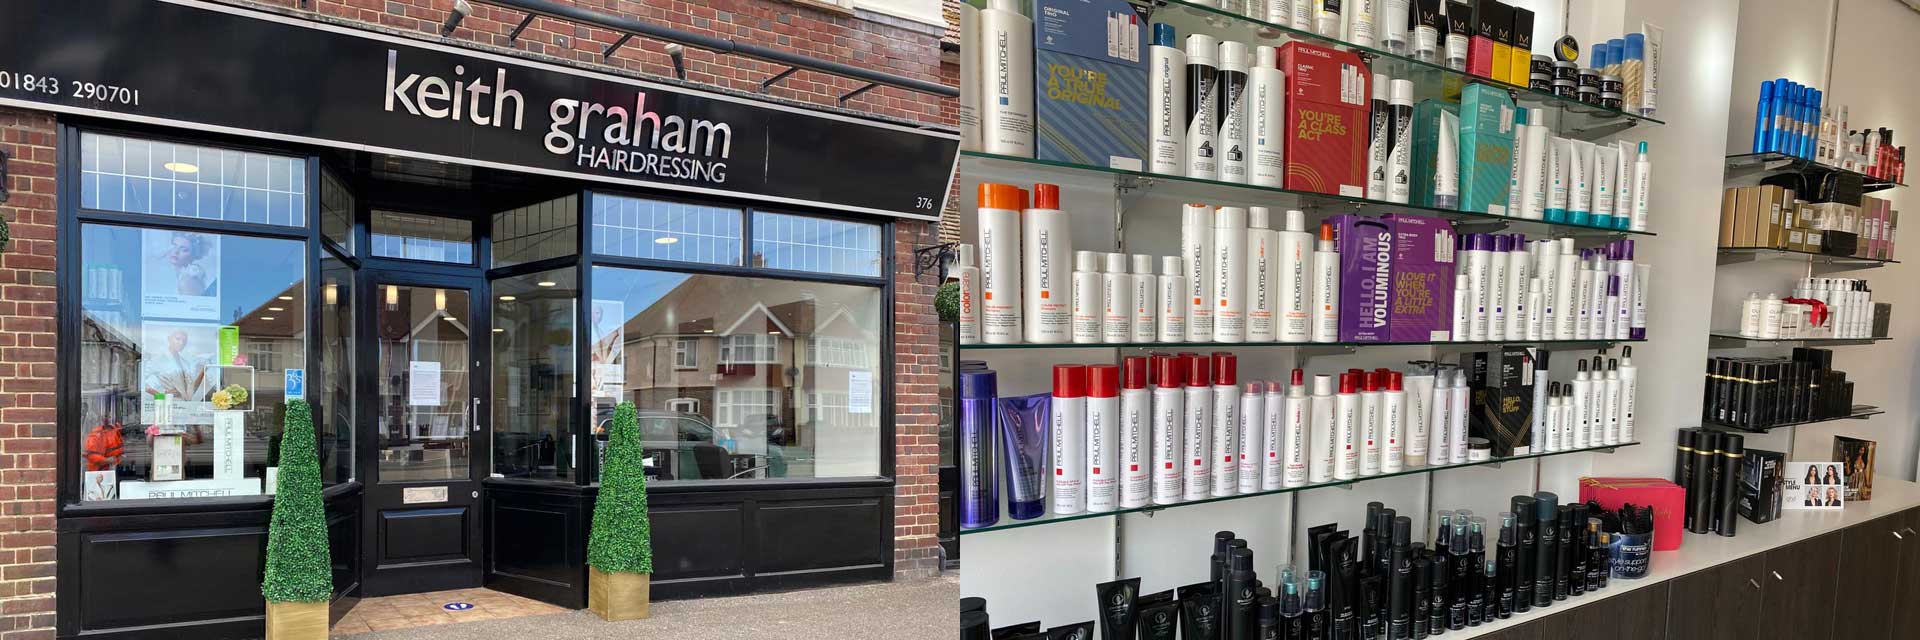 Images of the exterior at Keith Graham Hairdressing